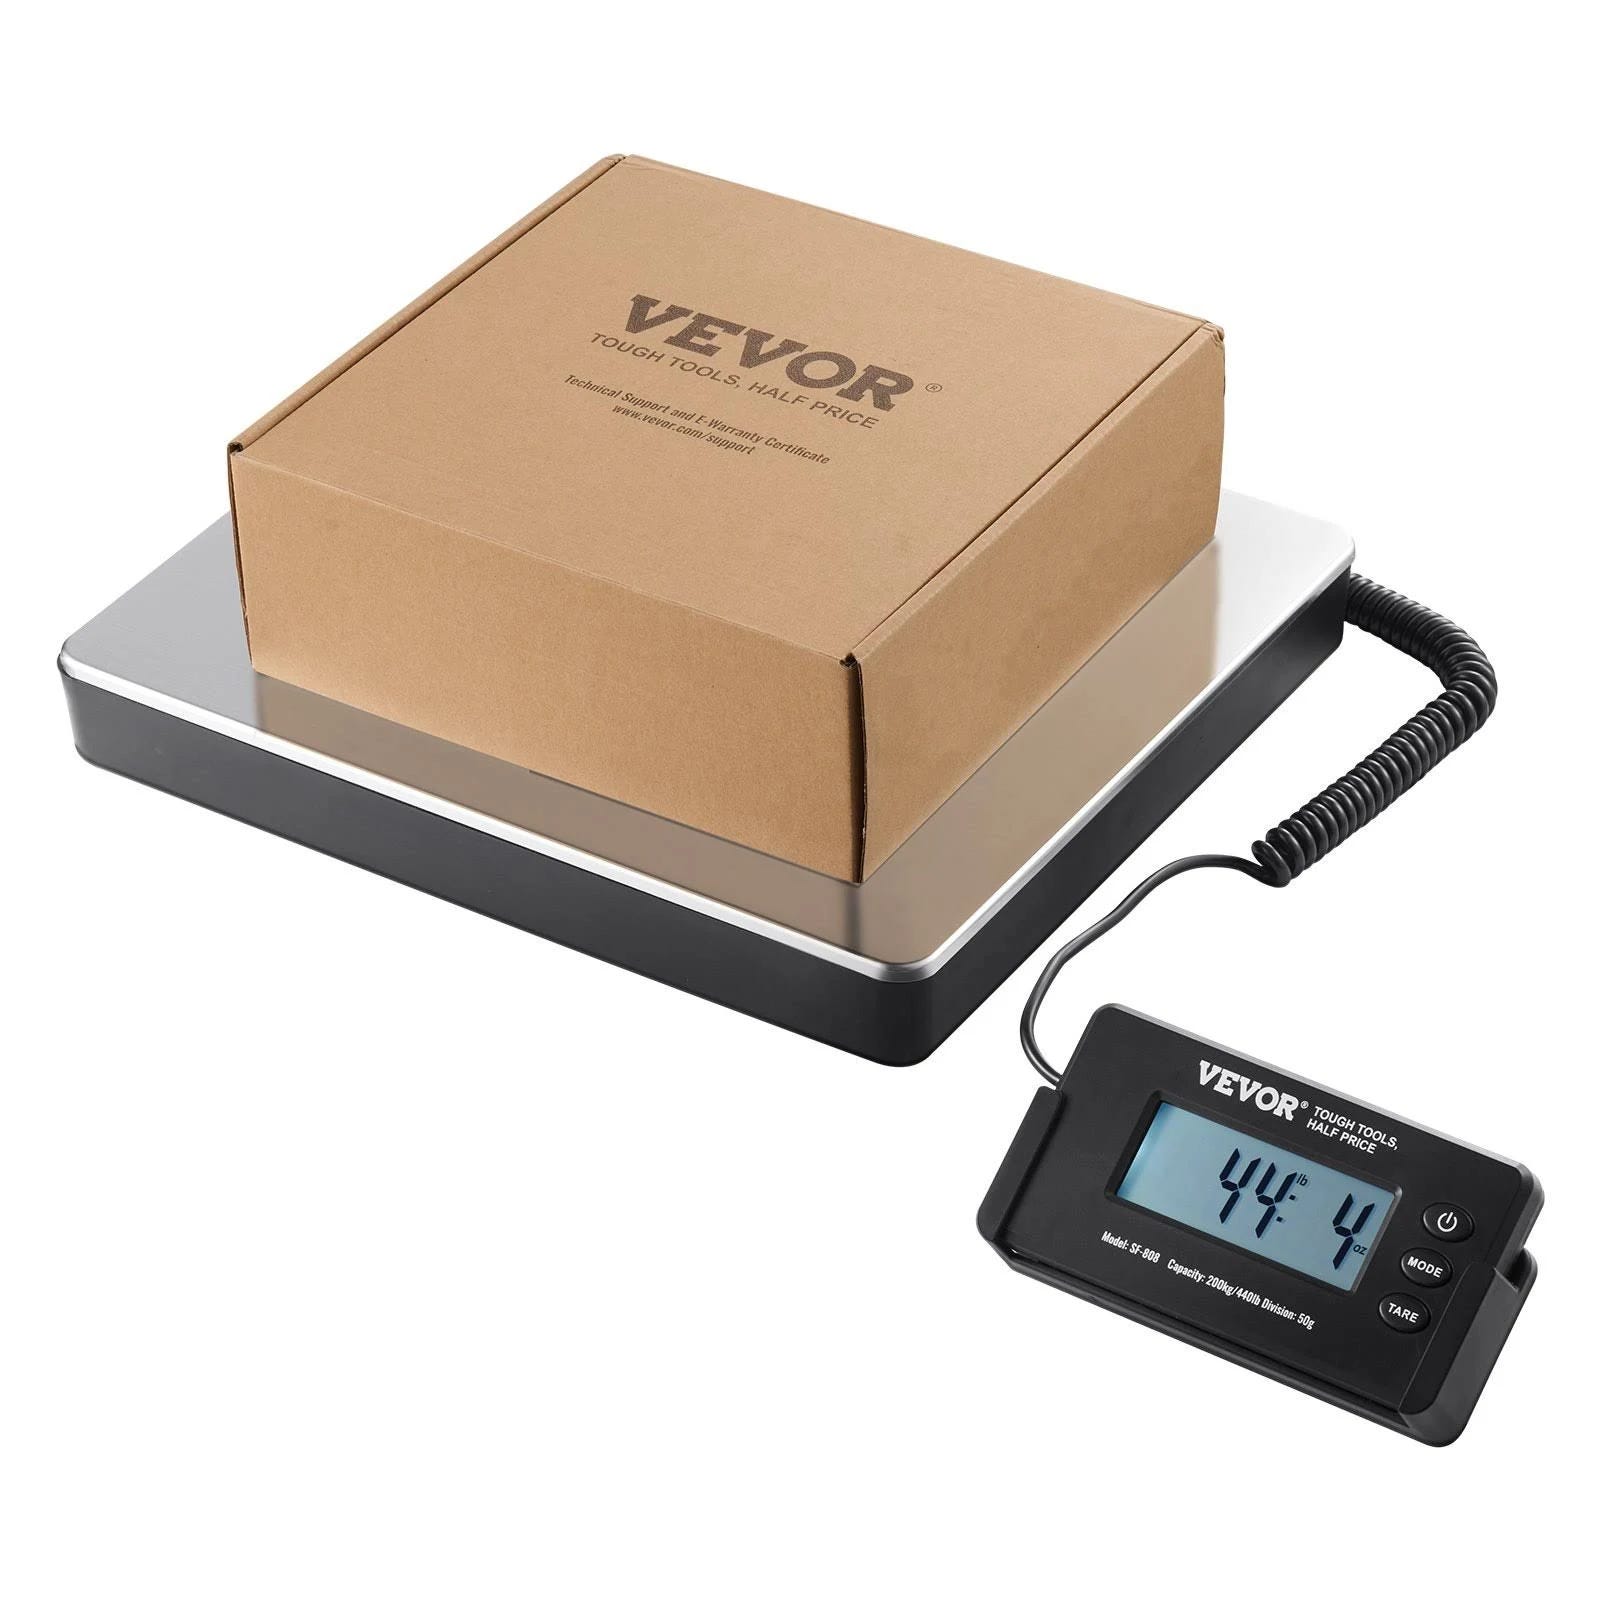 Digital Shipping Scale for Accurate Packaging Weights | Image